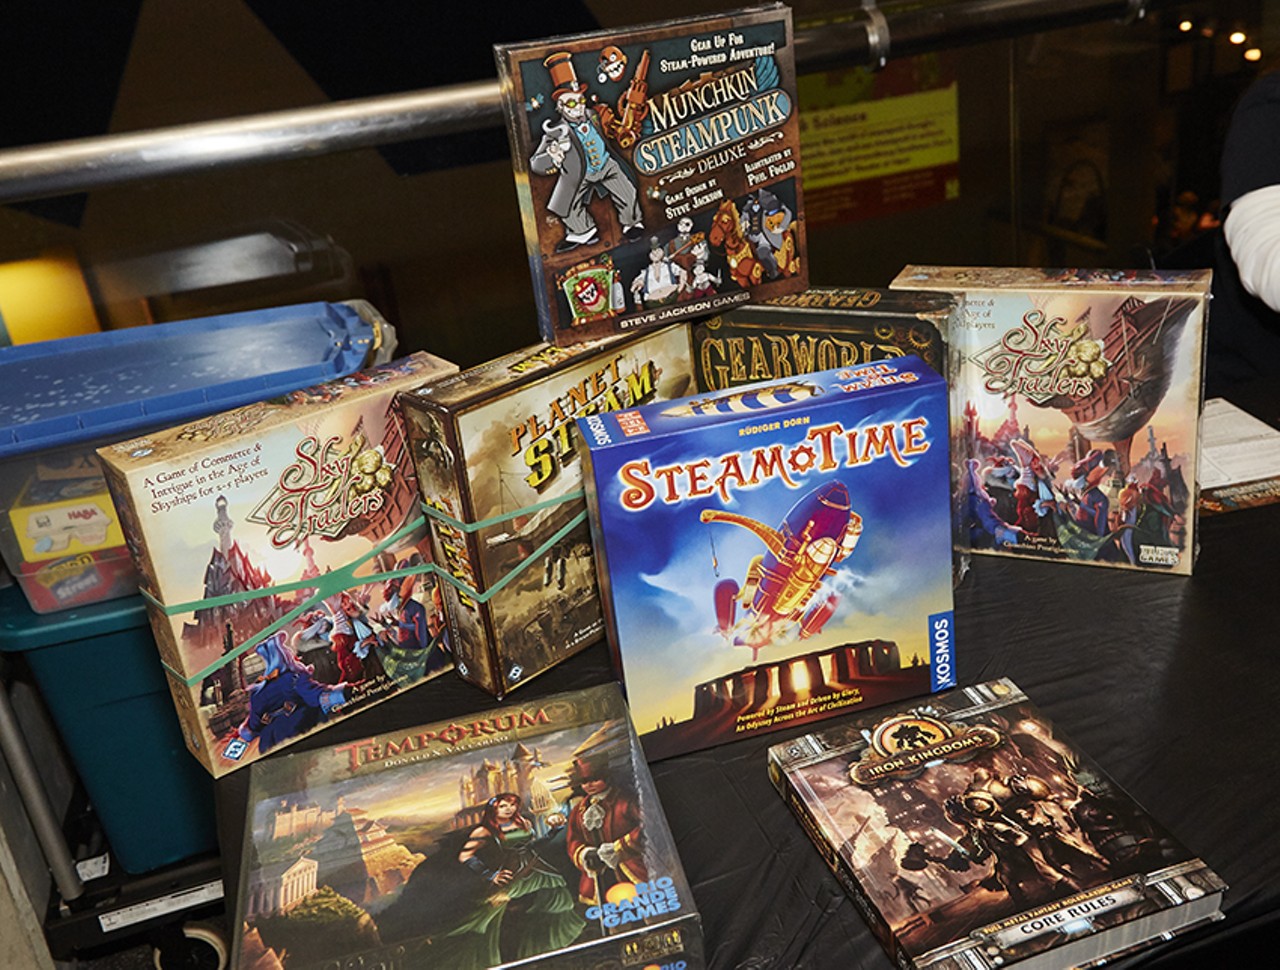 Here's a collection of steampunk board games -- want to play?